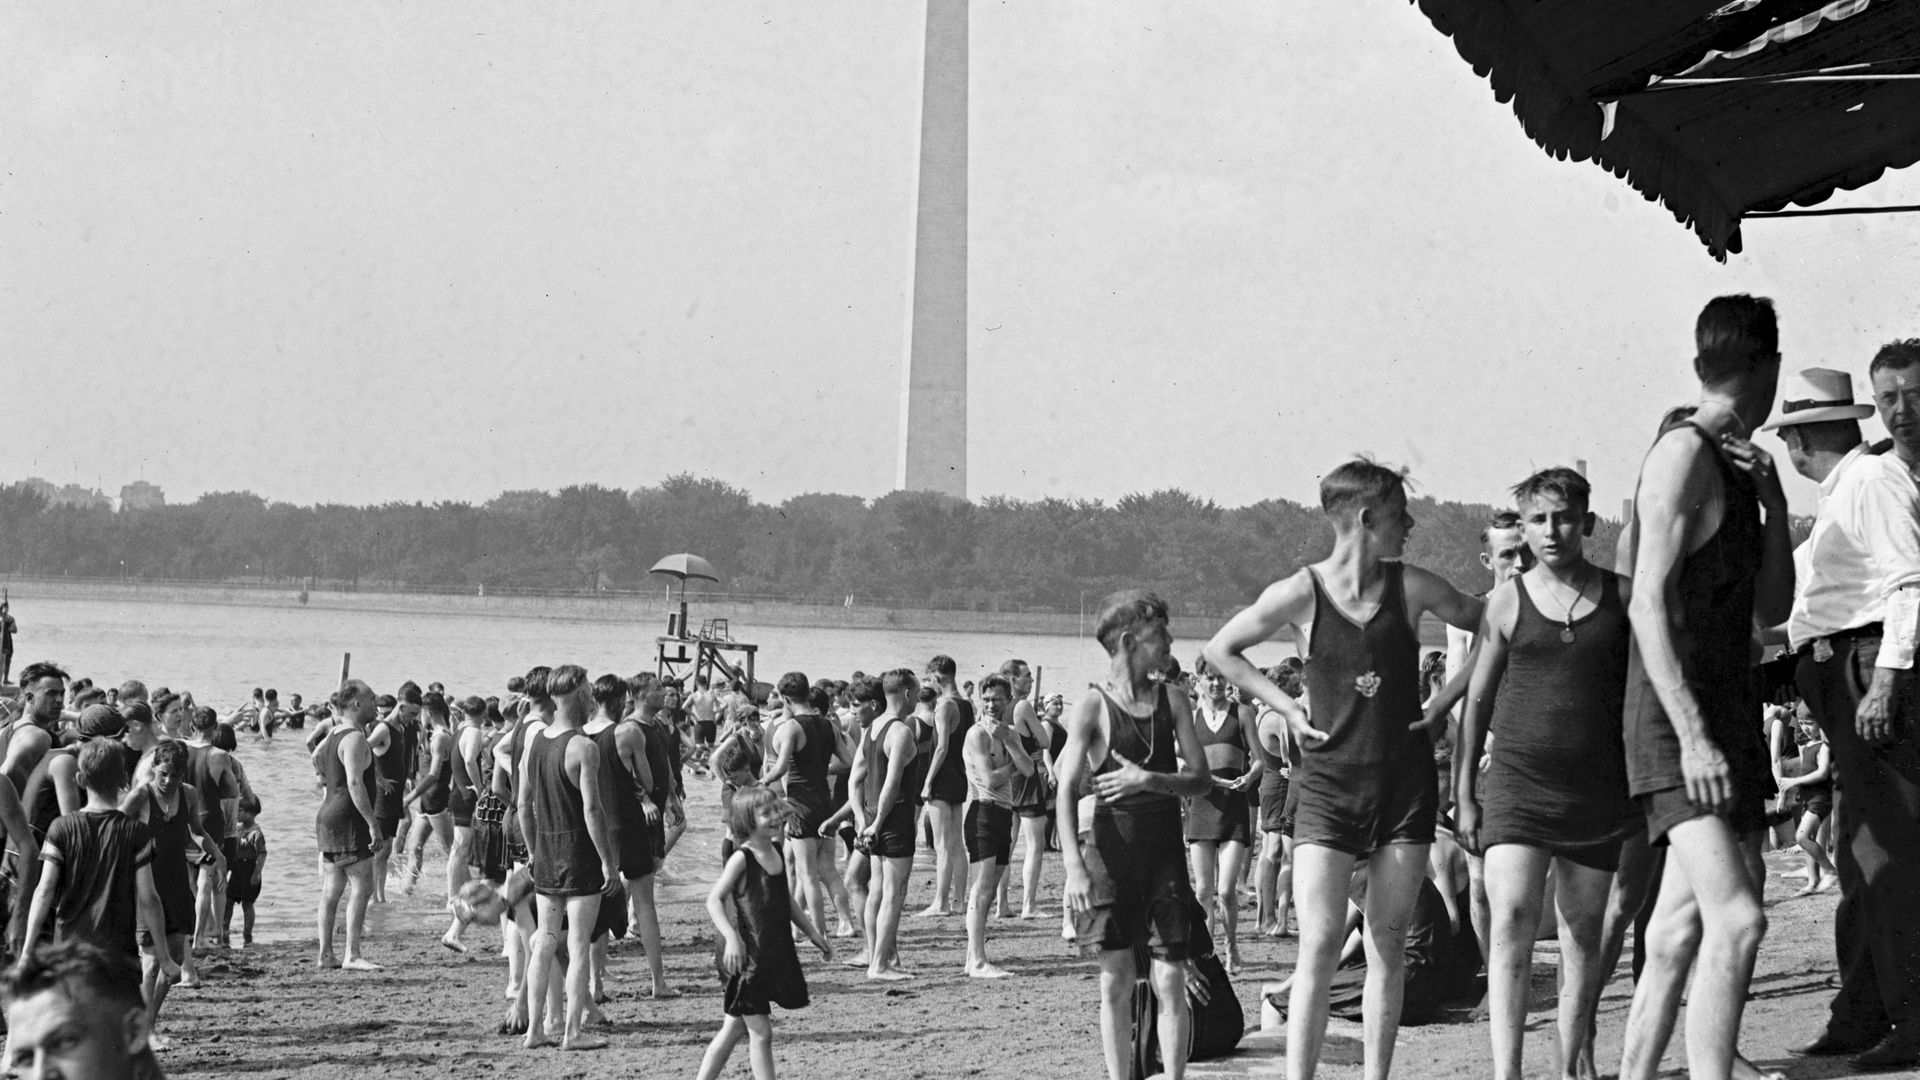 A large crowd of boys in bathing suits on the beach at Washington, DC's tidal basin, in the early twentieth century. The Washington Monument is visible in the background. 